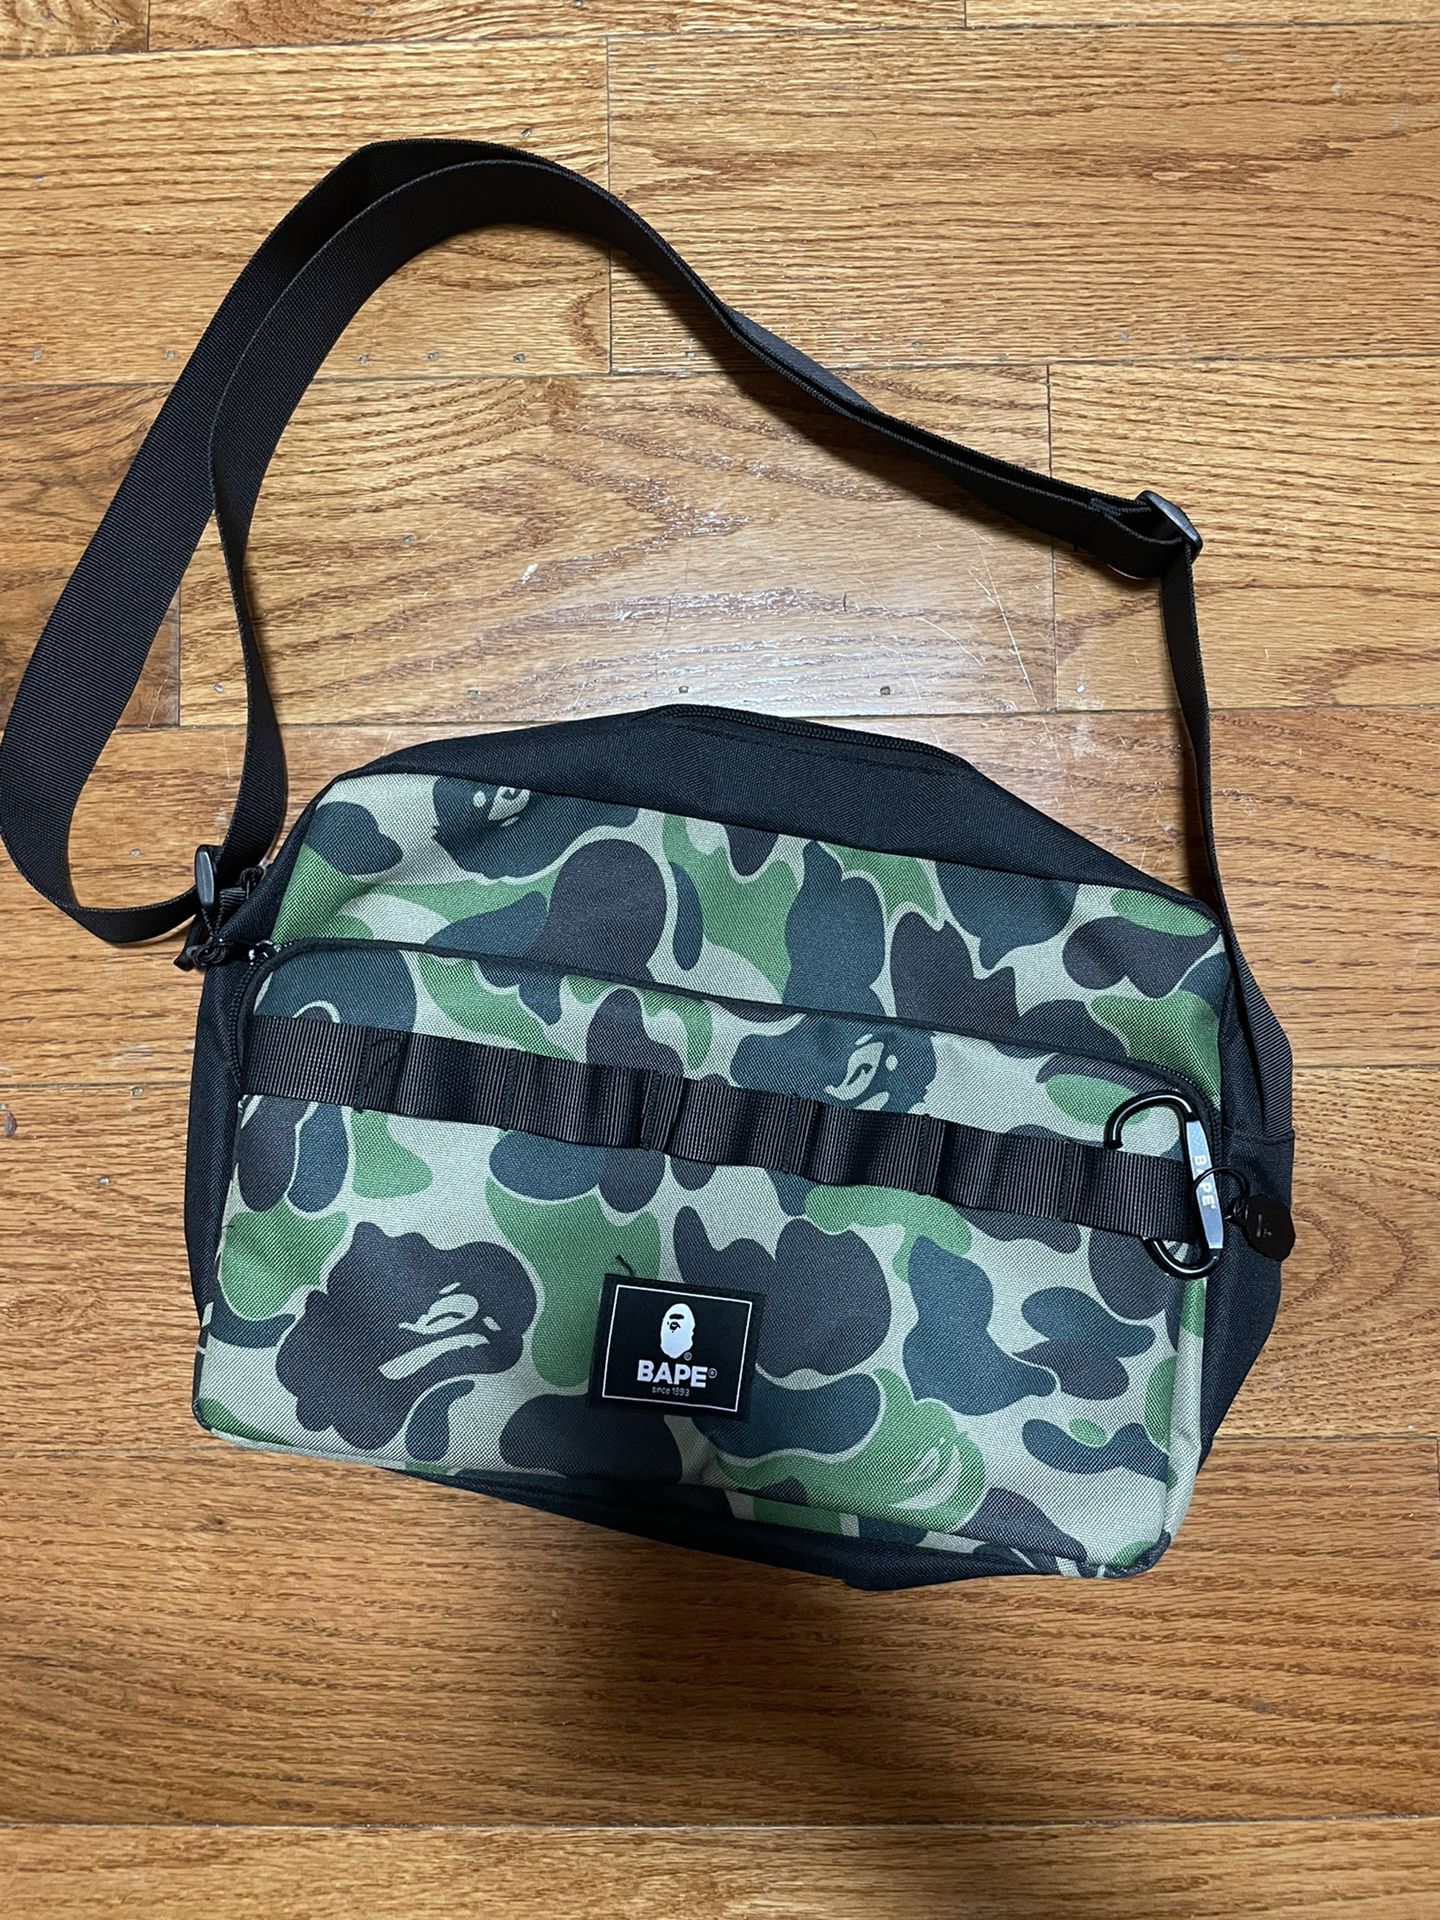 Bape Backpack for Sale in Staten Island, NY - OfferUp